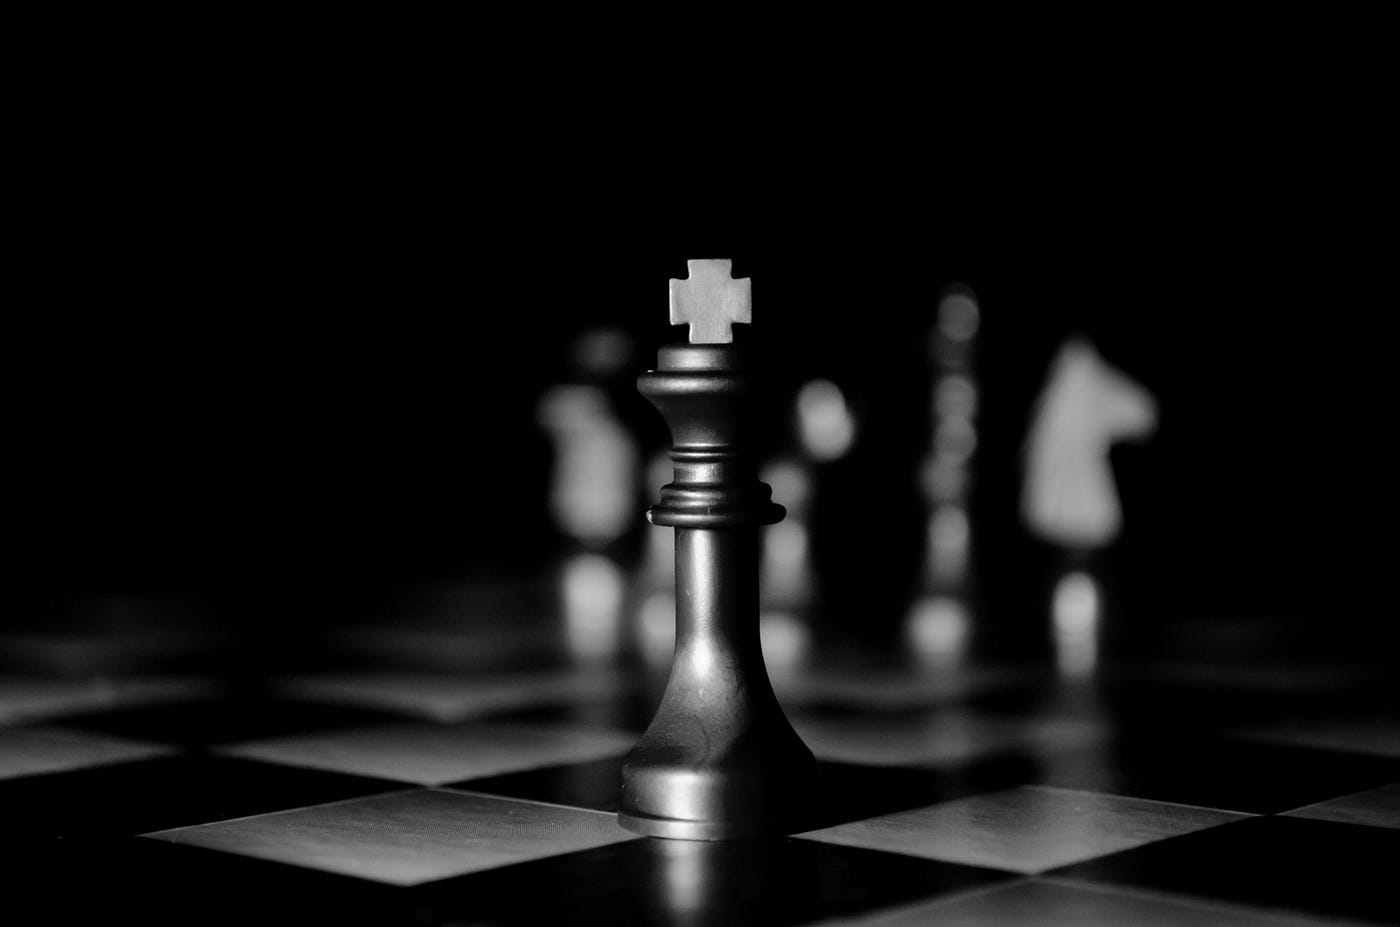 Big Data and Chess: What are the Predictive Point Values of Chess Pieces?